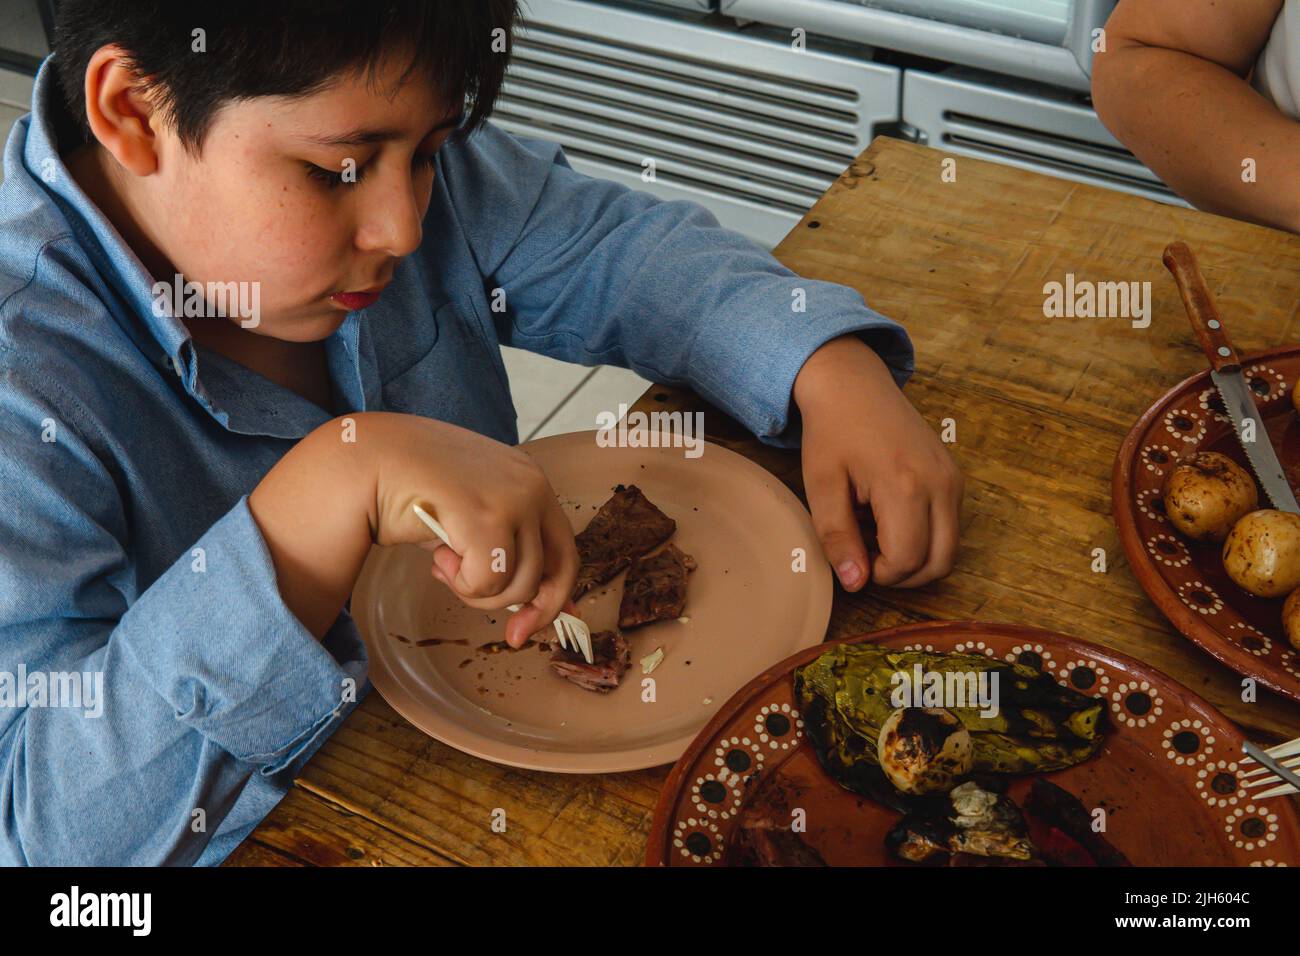 Top view of an elementary school boy with various dishes on the table eating a cut of meat. High quality photo. Wooden table. A plate of clay with food. Children wearing a blue shirts.  Stock Photo